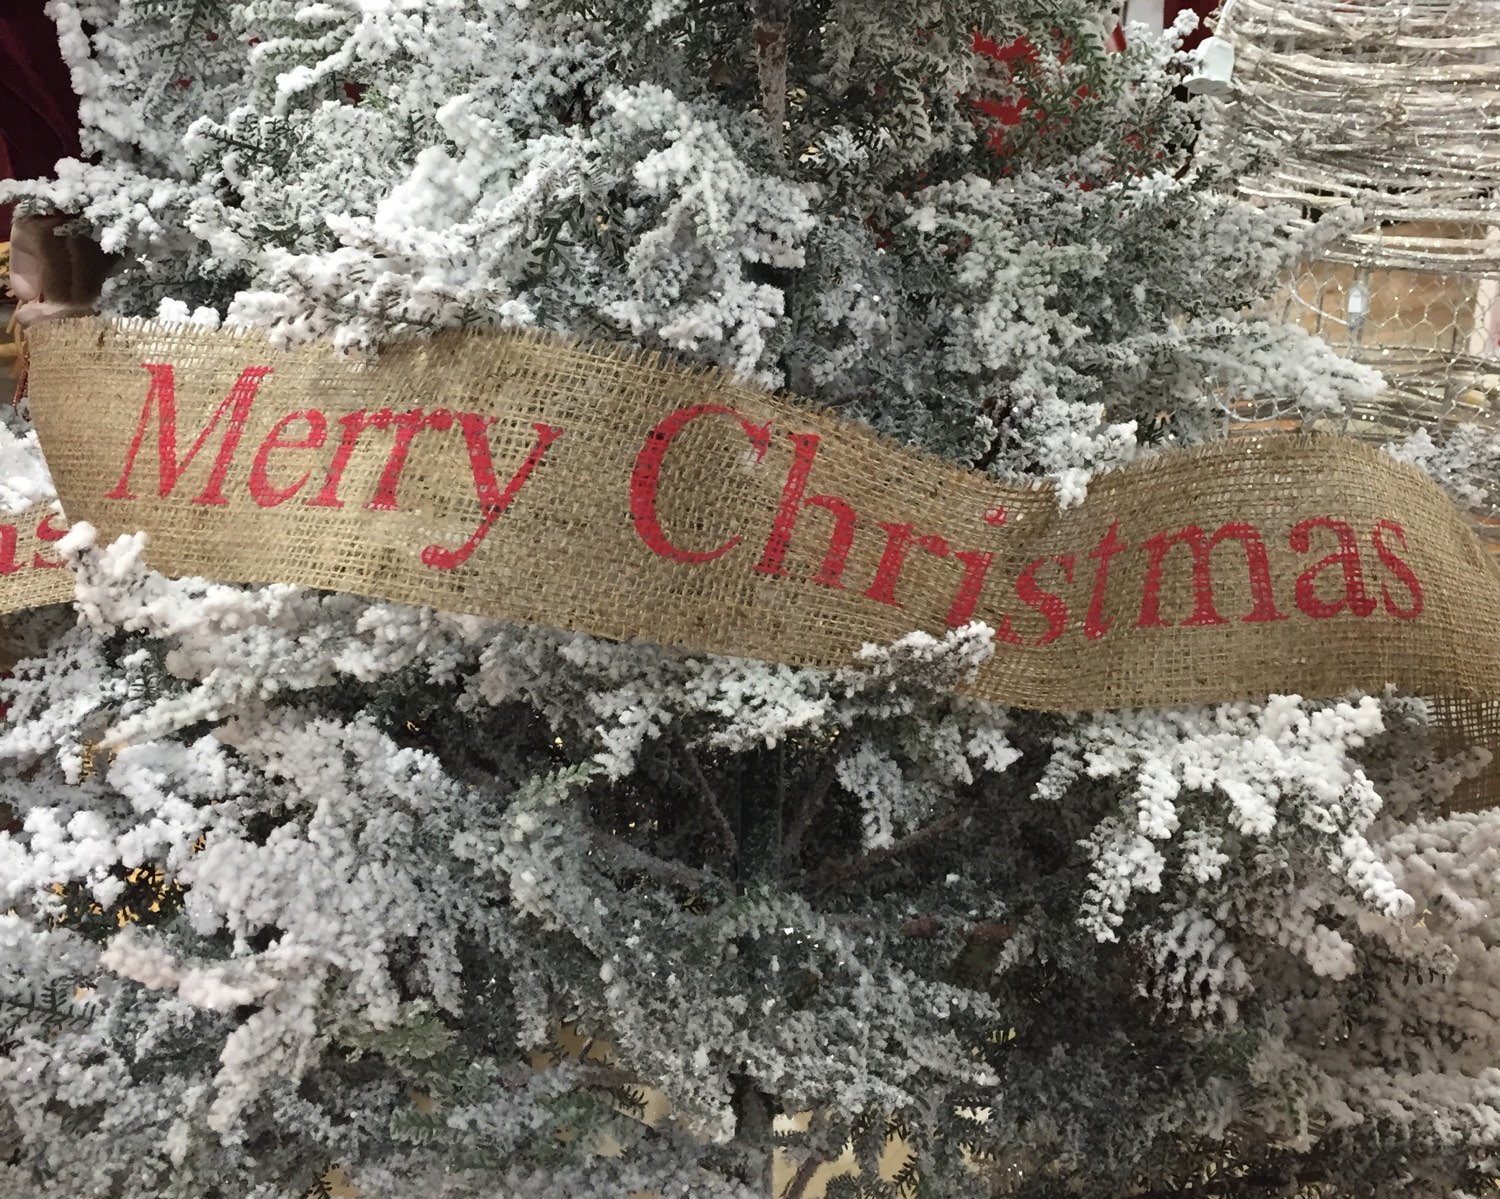 How to use burlap to wrap trees/plants for Christmas and winter